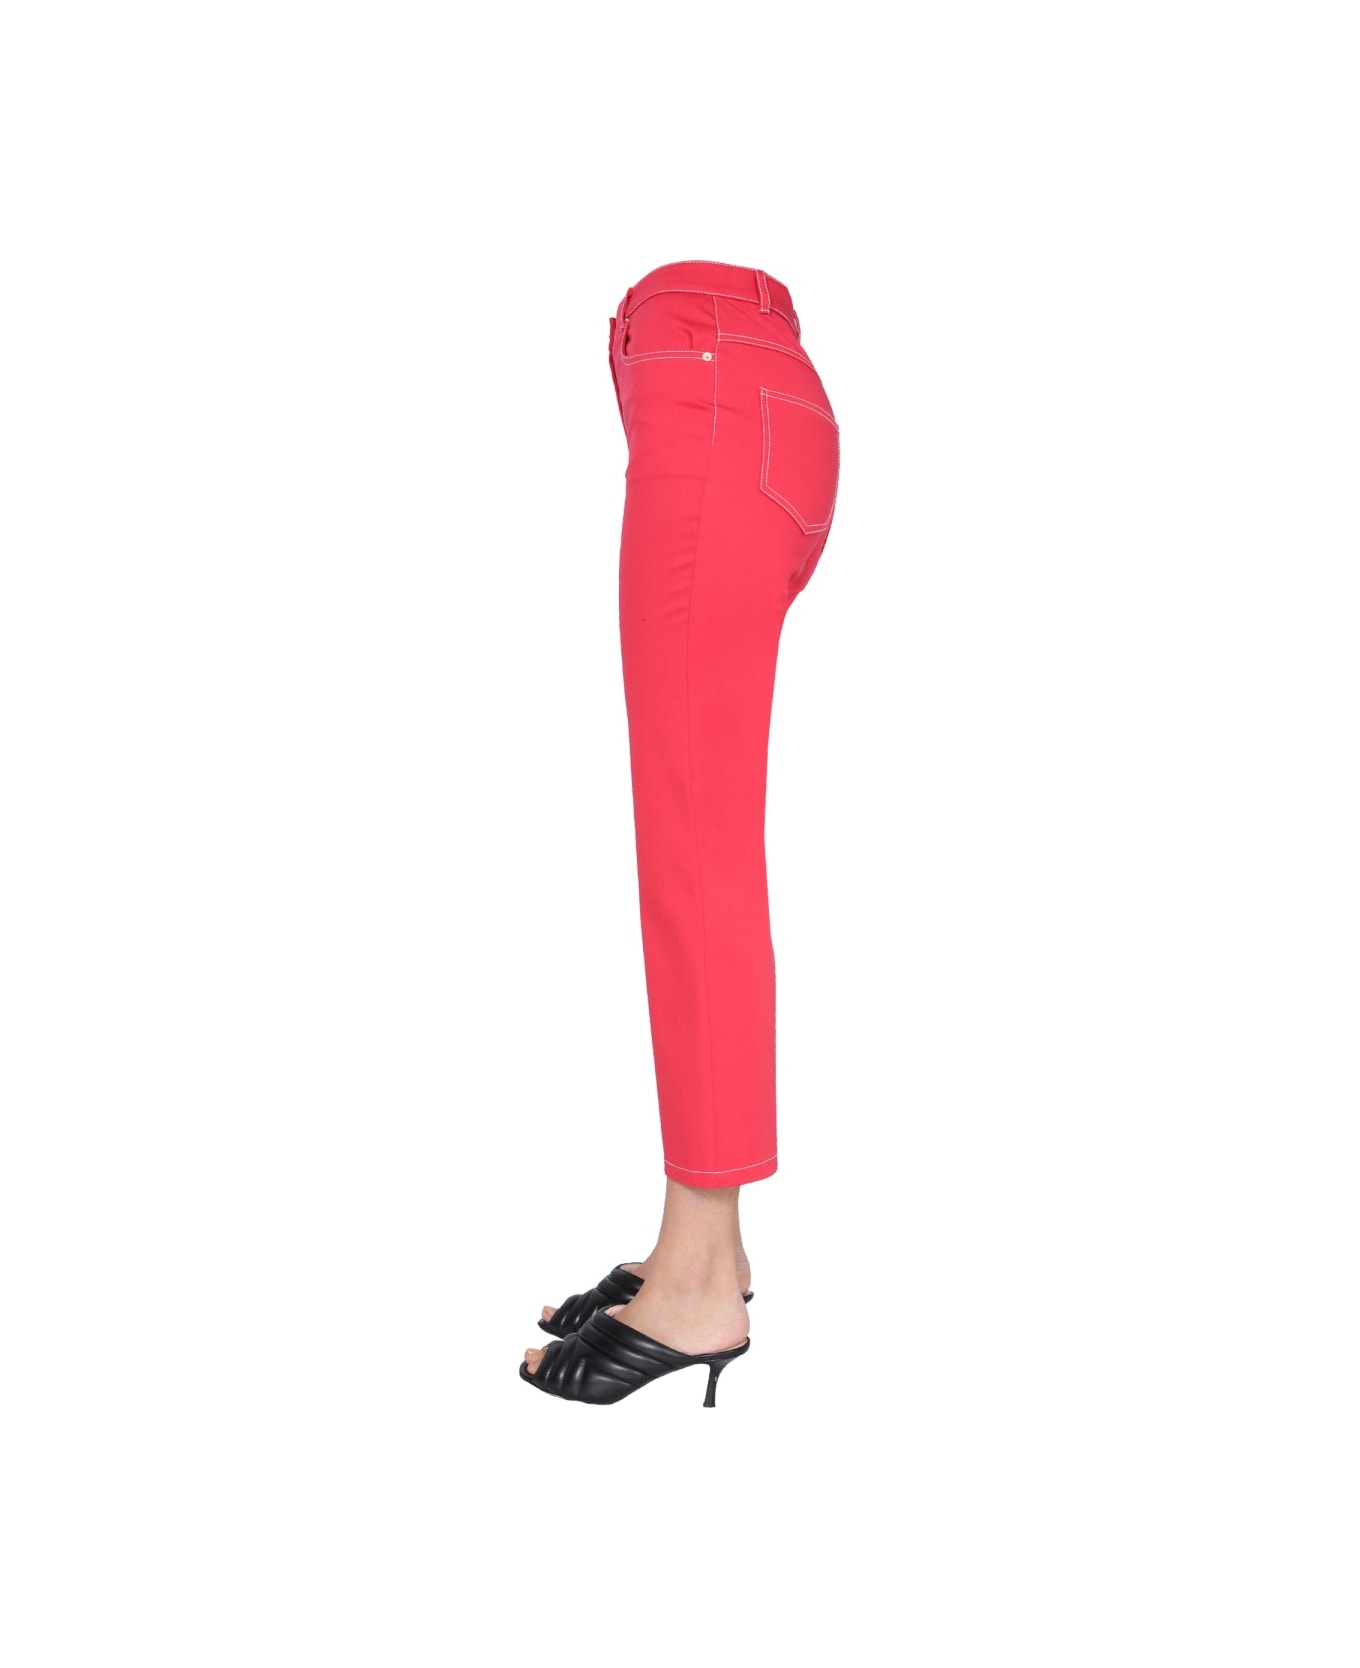 Boutique Moschino Skinny Kick Jeans - RED